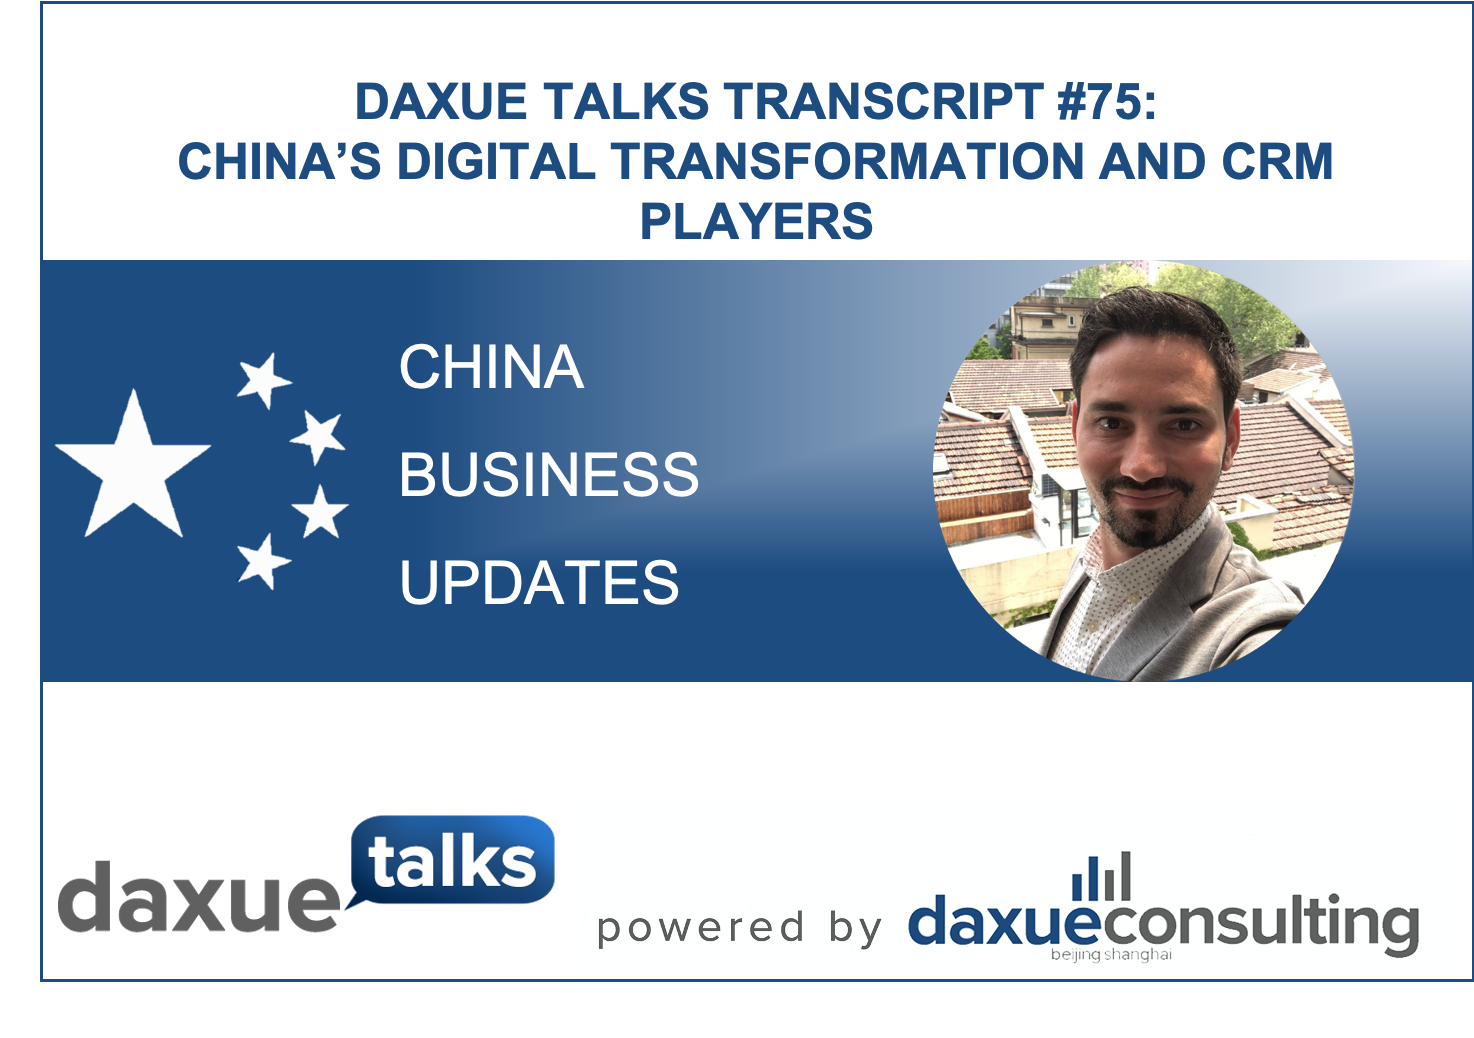 Daxue Talks transcript #75: China’s digital transformation and CRM players